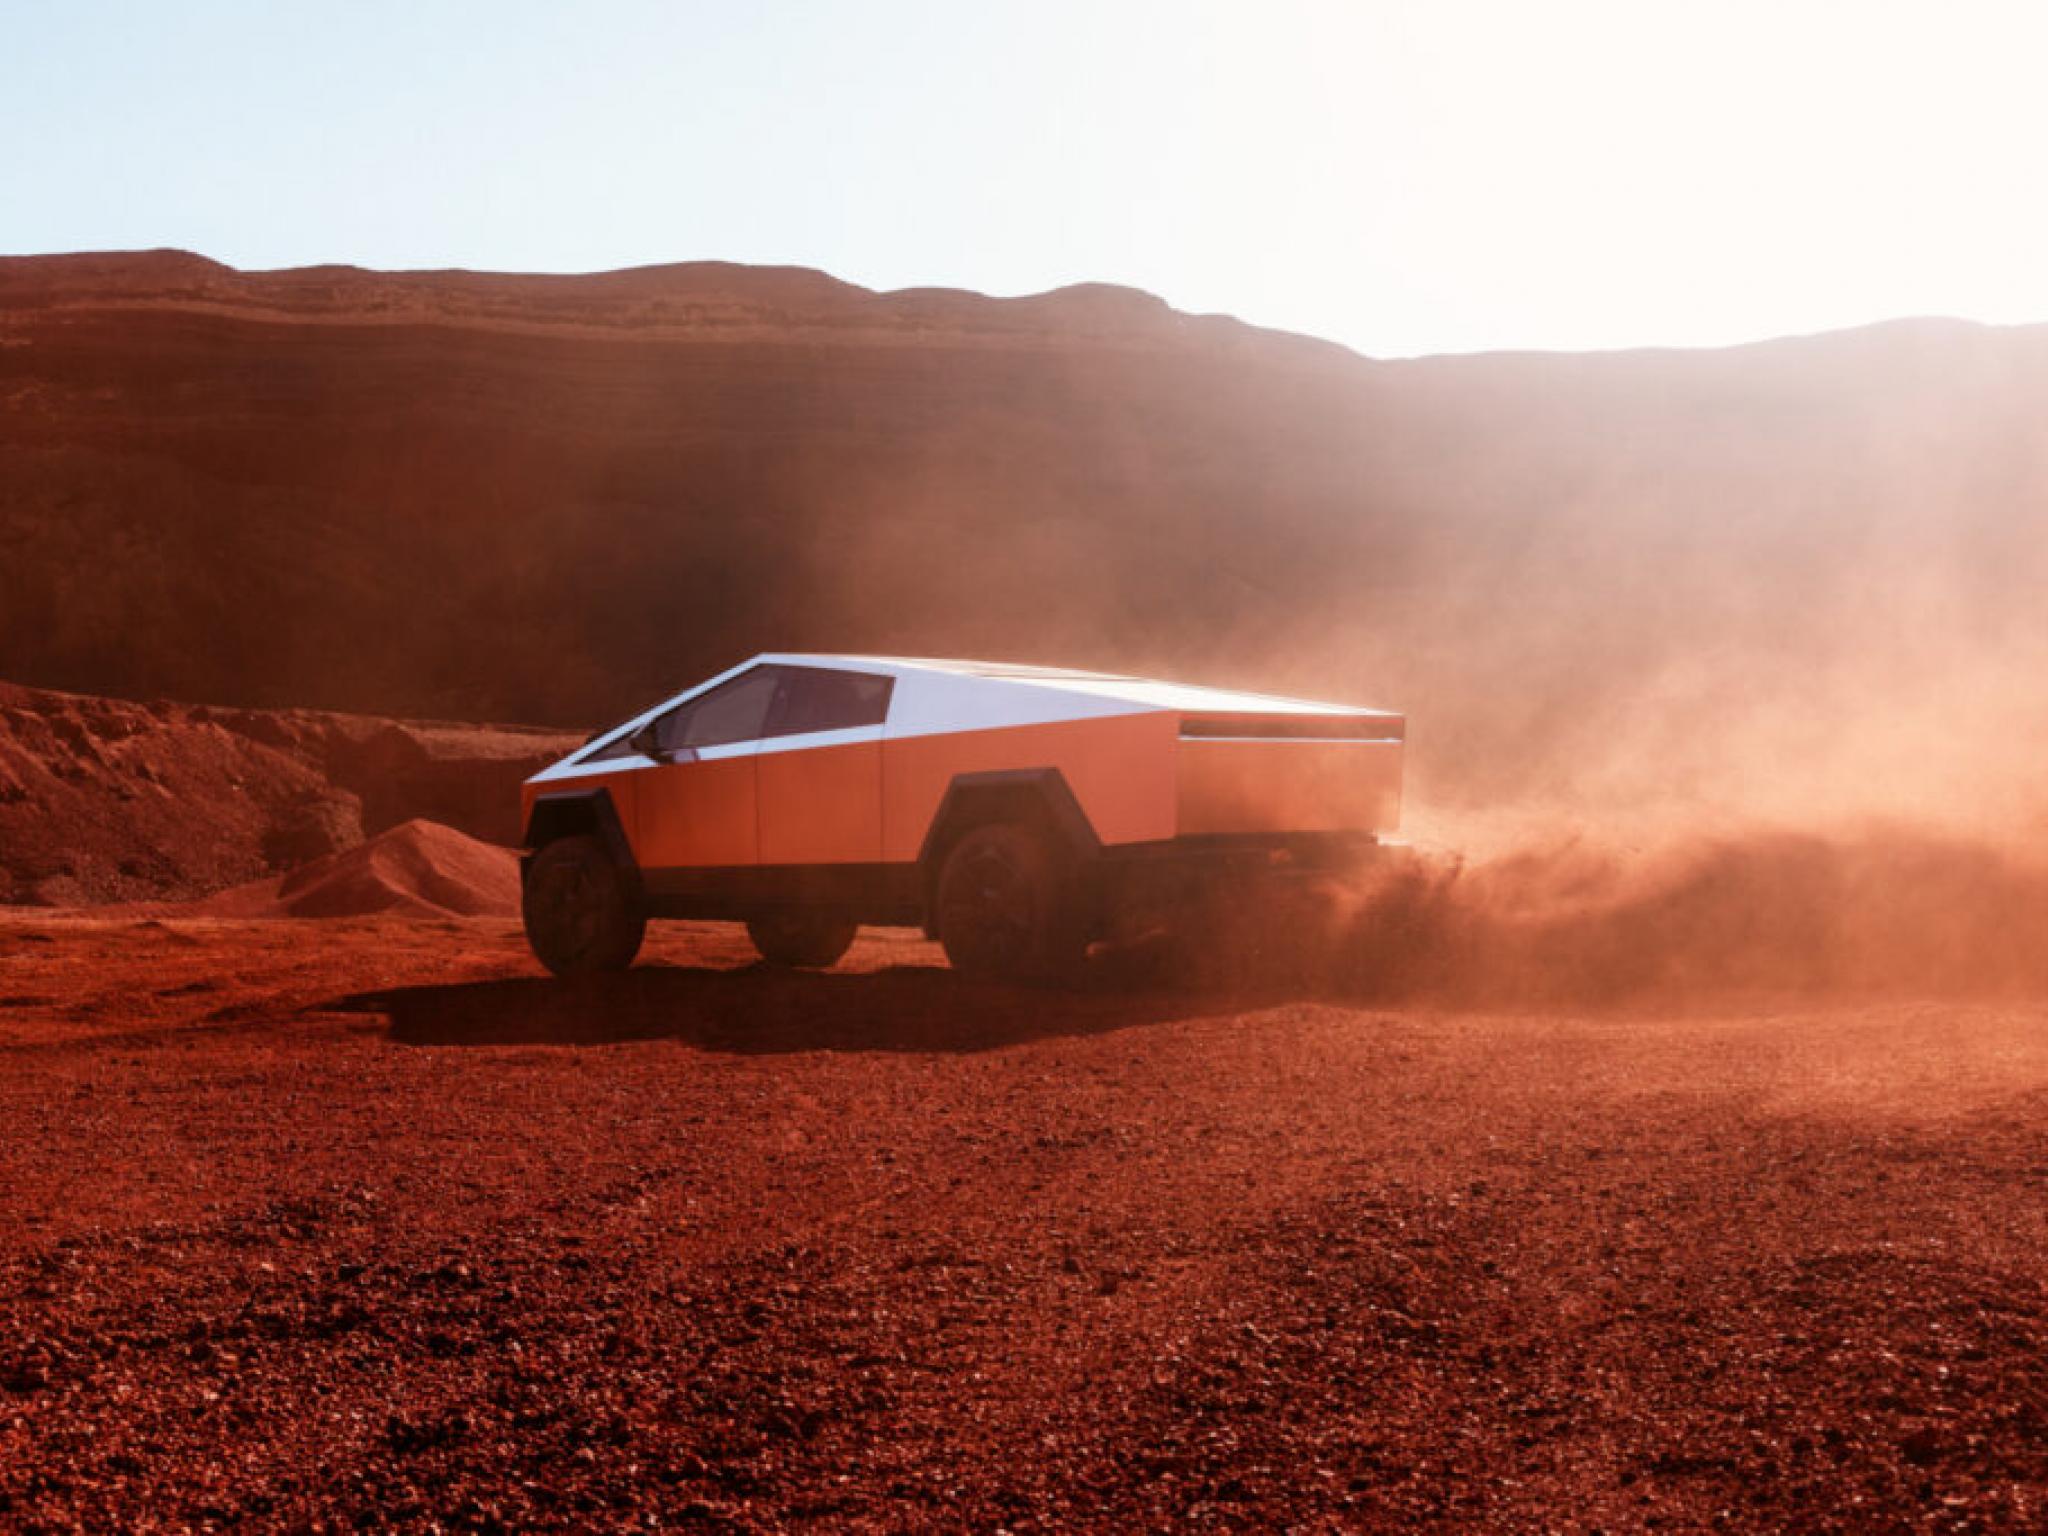  teslas-cybertruck-finally-getting-its-promised-off-roading-features-watch-it-getting-tested-for-rock-crawl-jumps-sand-dune-crawl-and-more 